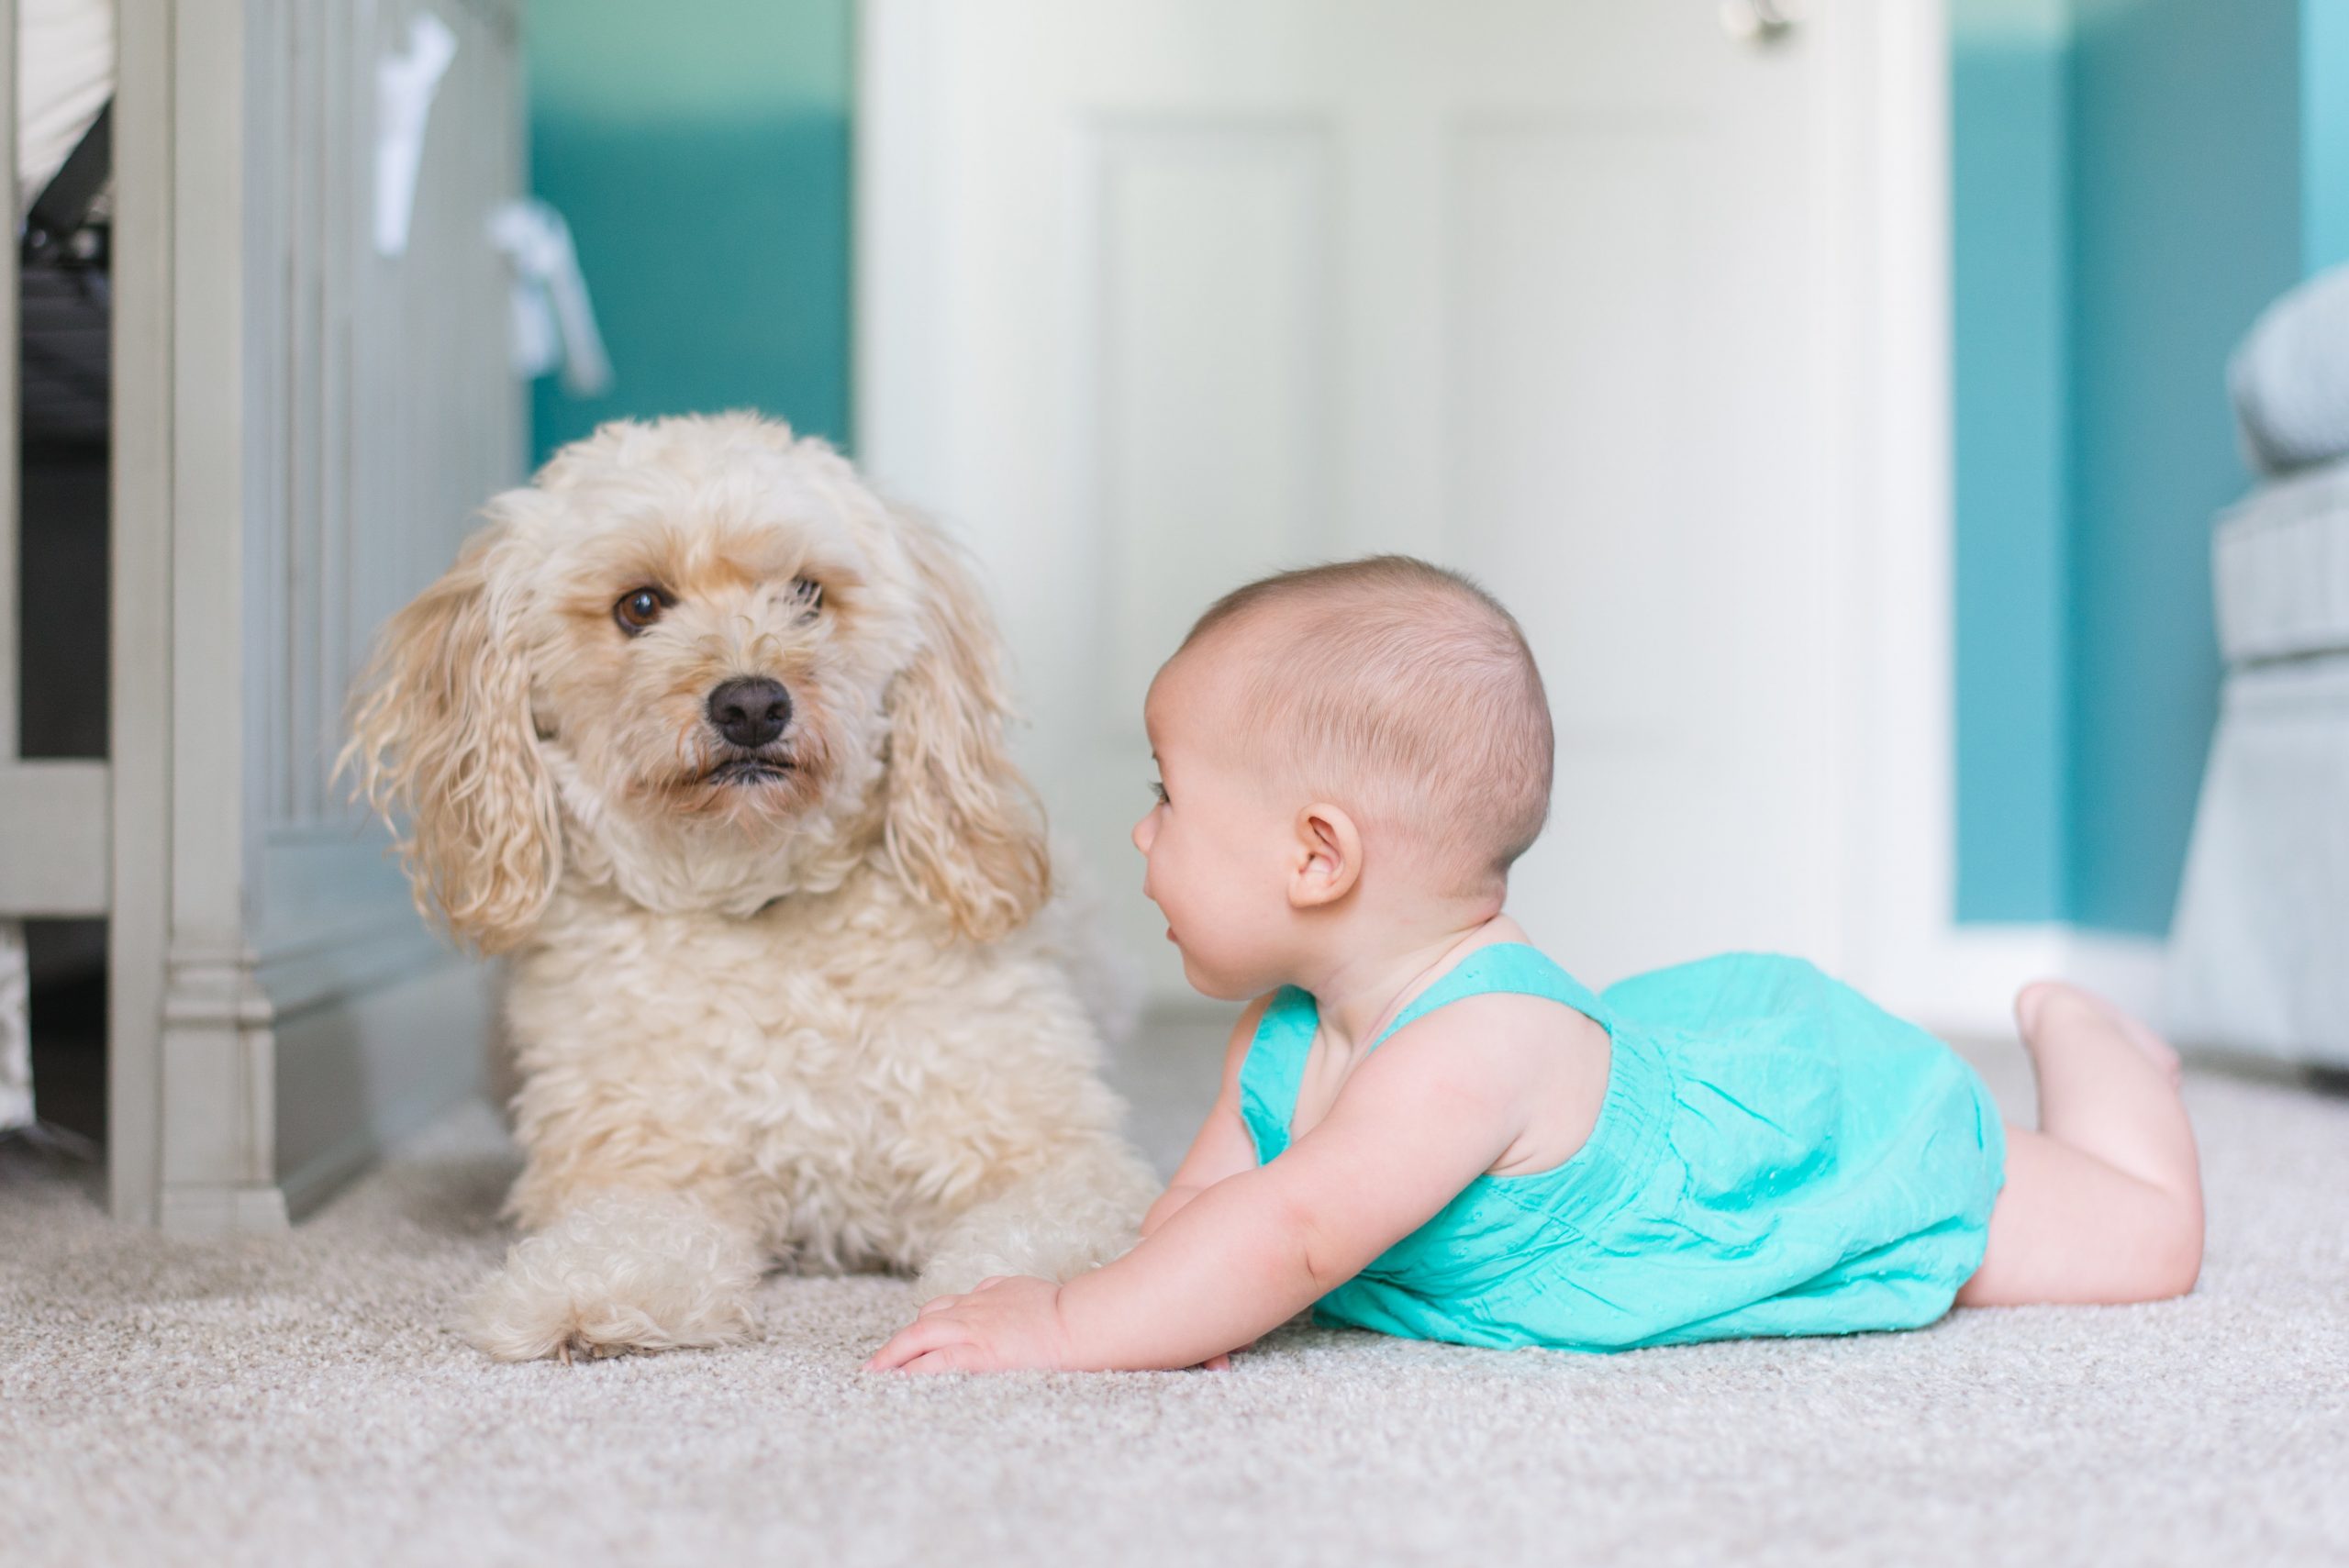 Picture of crawling baby approaching white fluffy dog